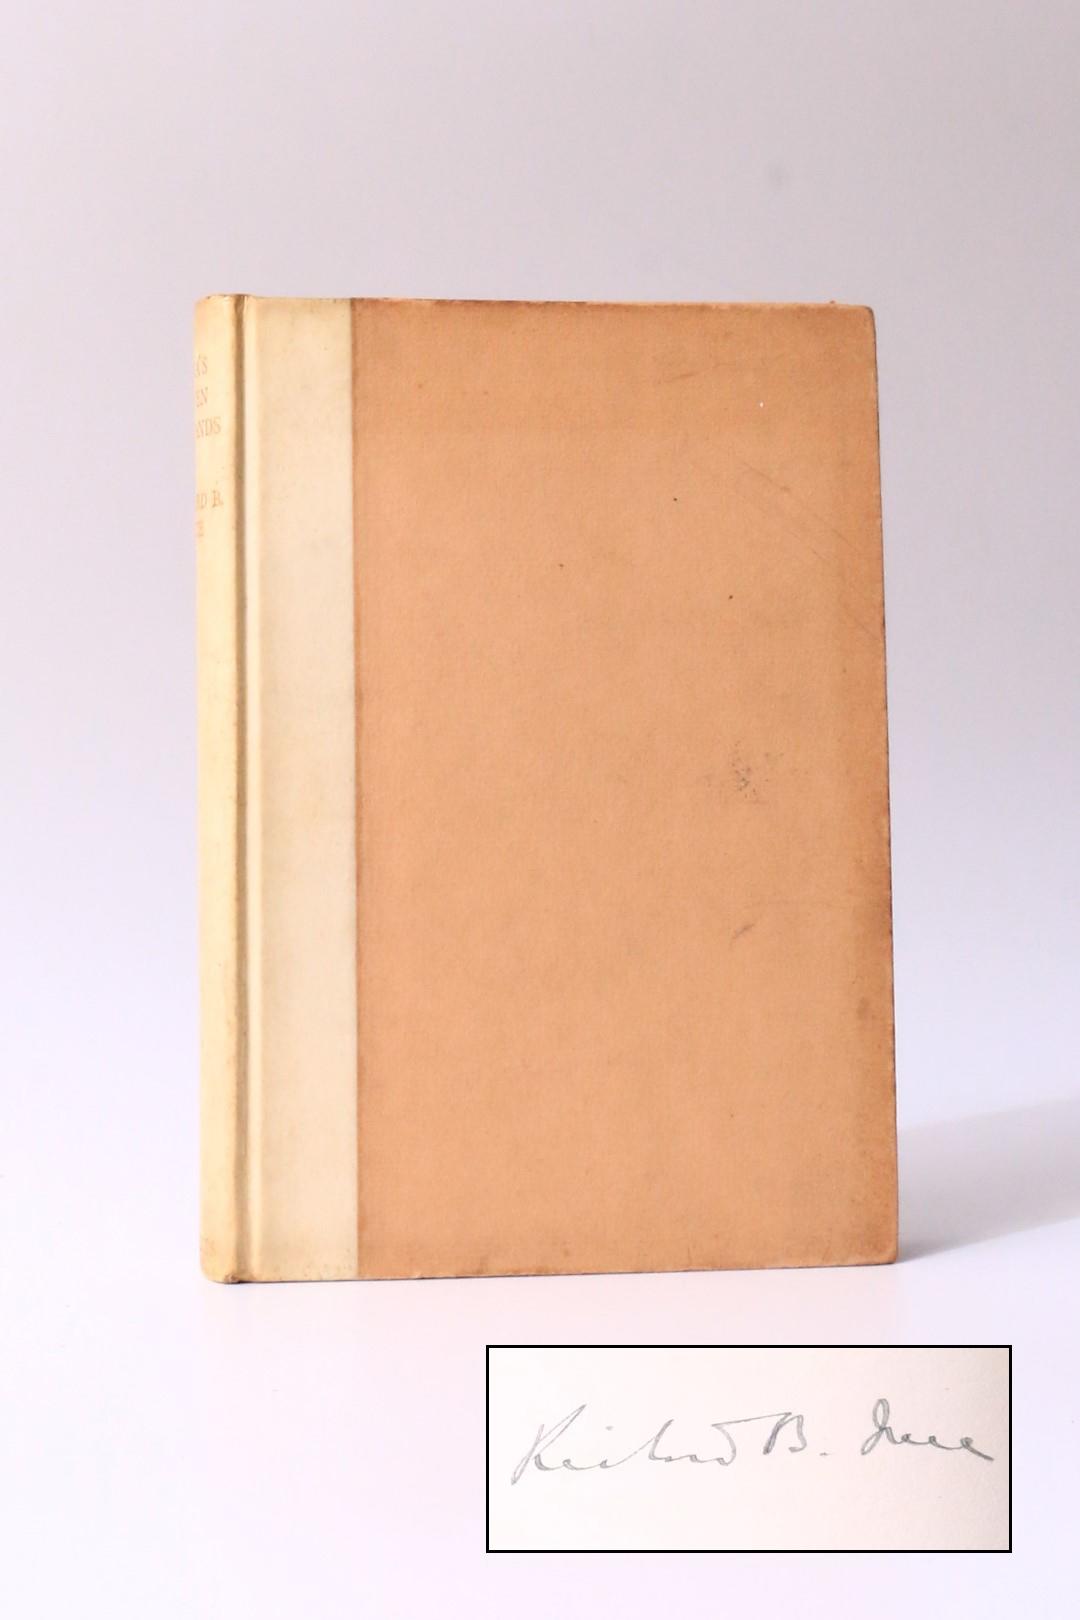 Richard B. Ince - Sara's Seven Husbands - George Roberts, 1928, Signed Limited Edition.